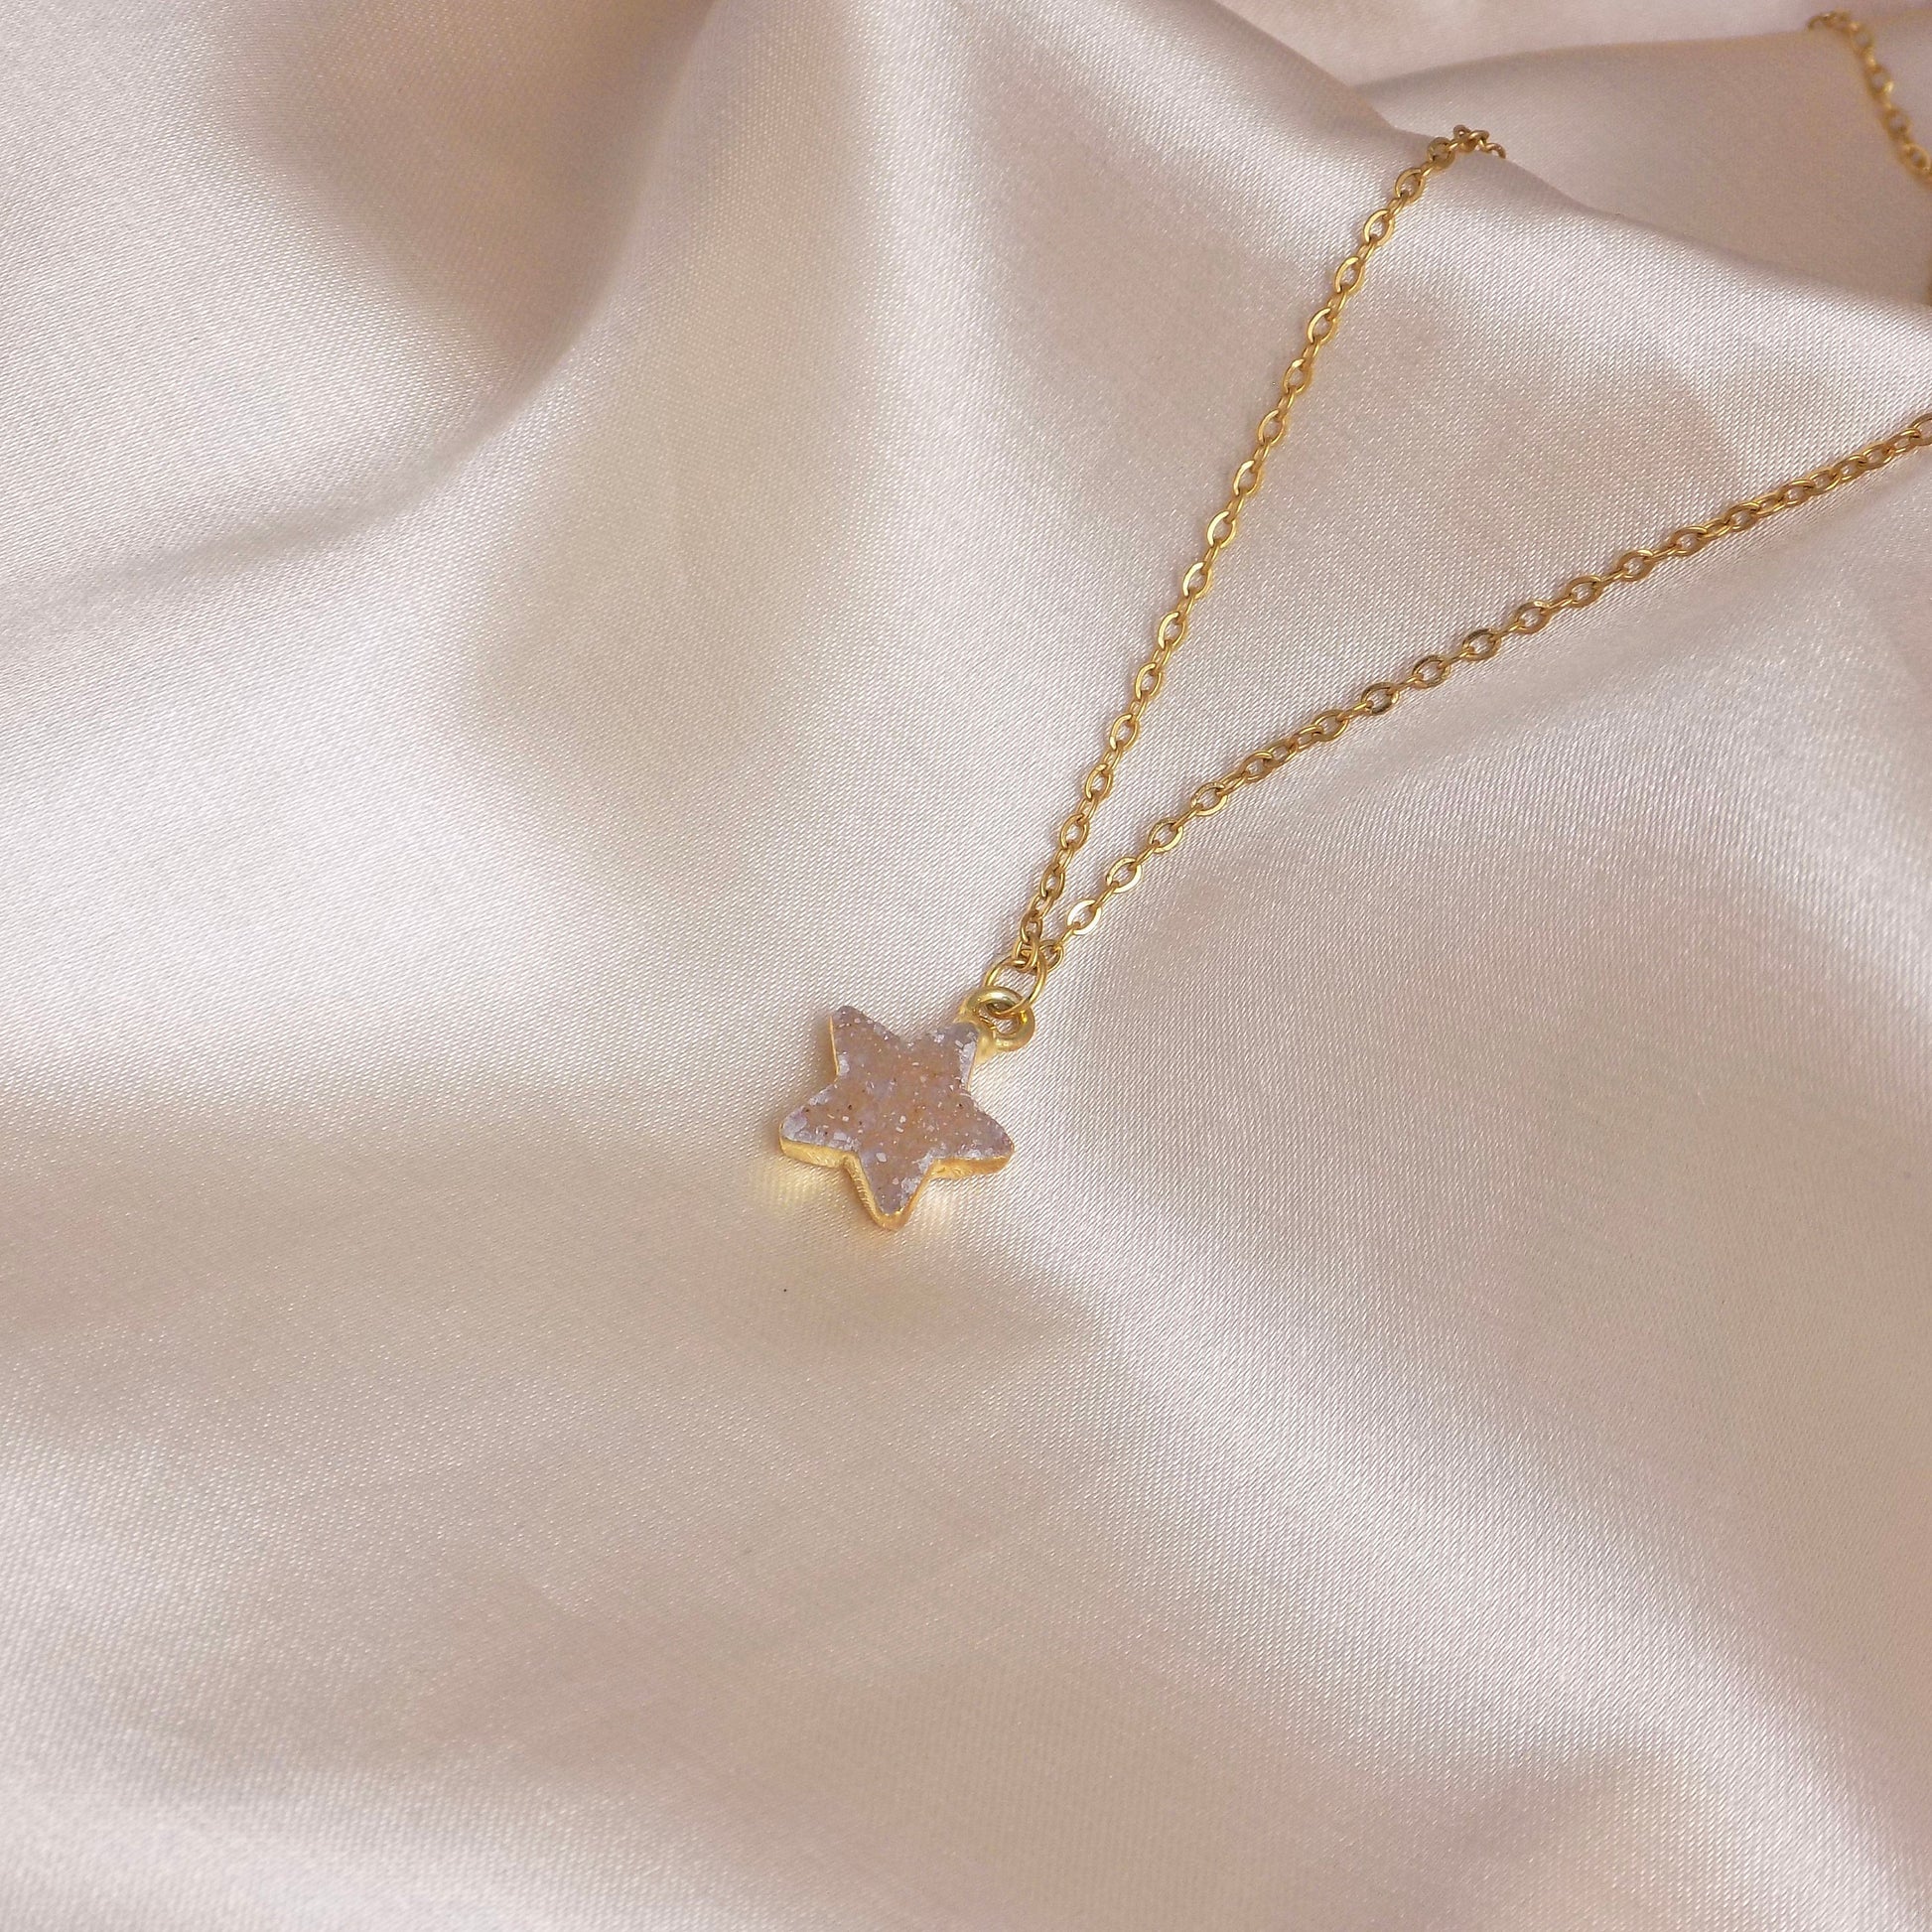 Tiny Star Natural Druzy Crystal Necklace on 18K Gold Stainless Steel Chain, G15-25